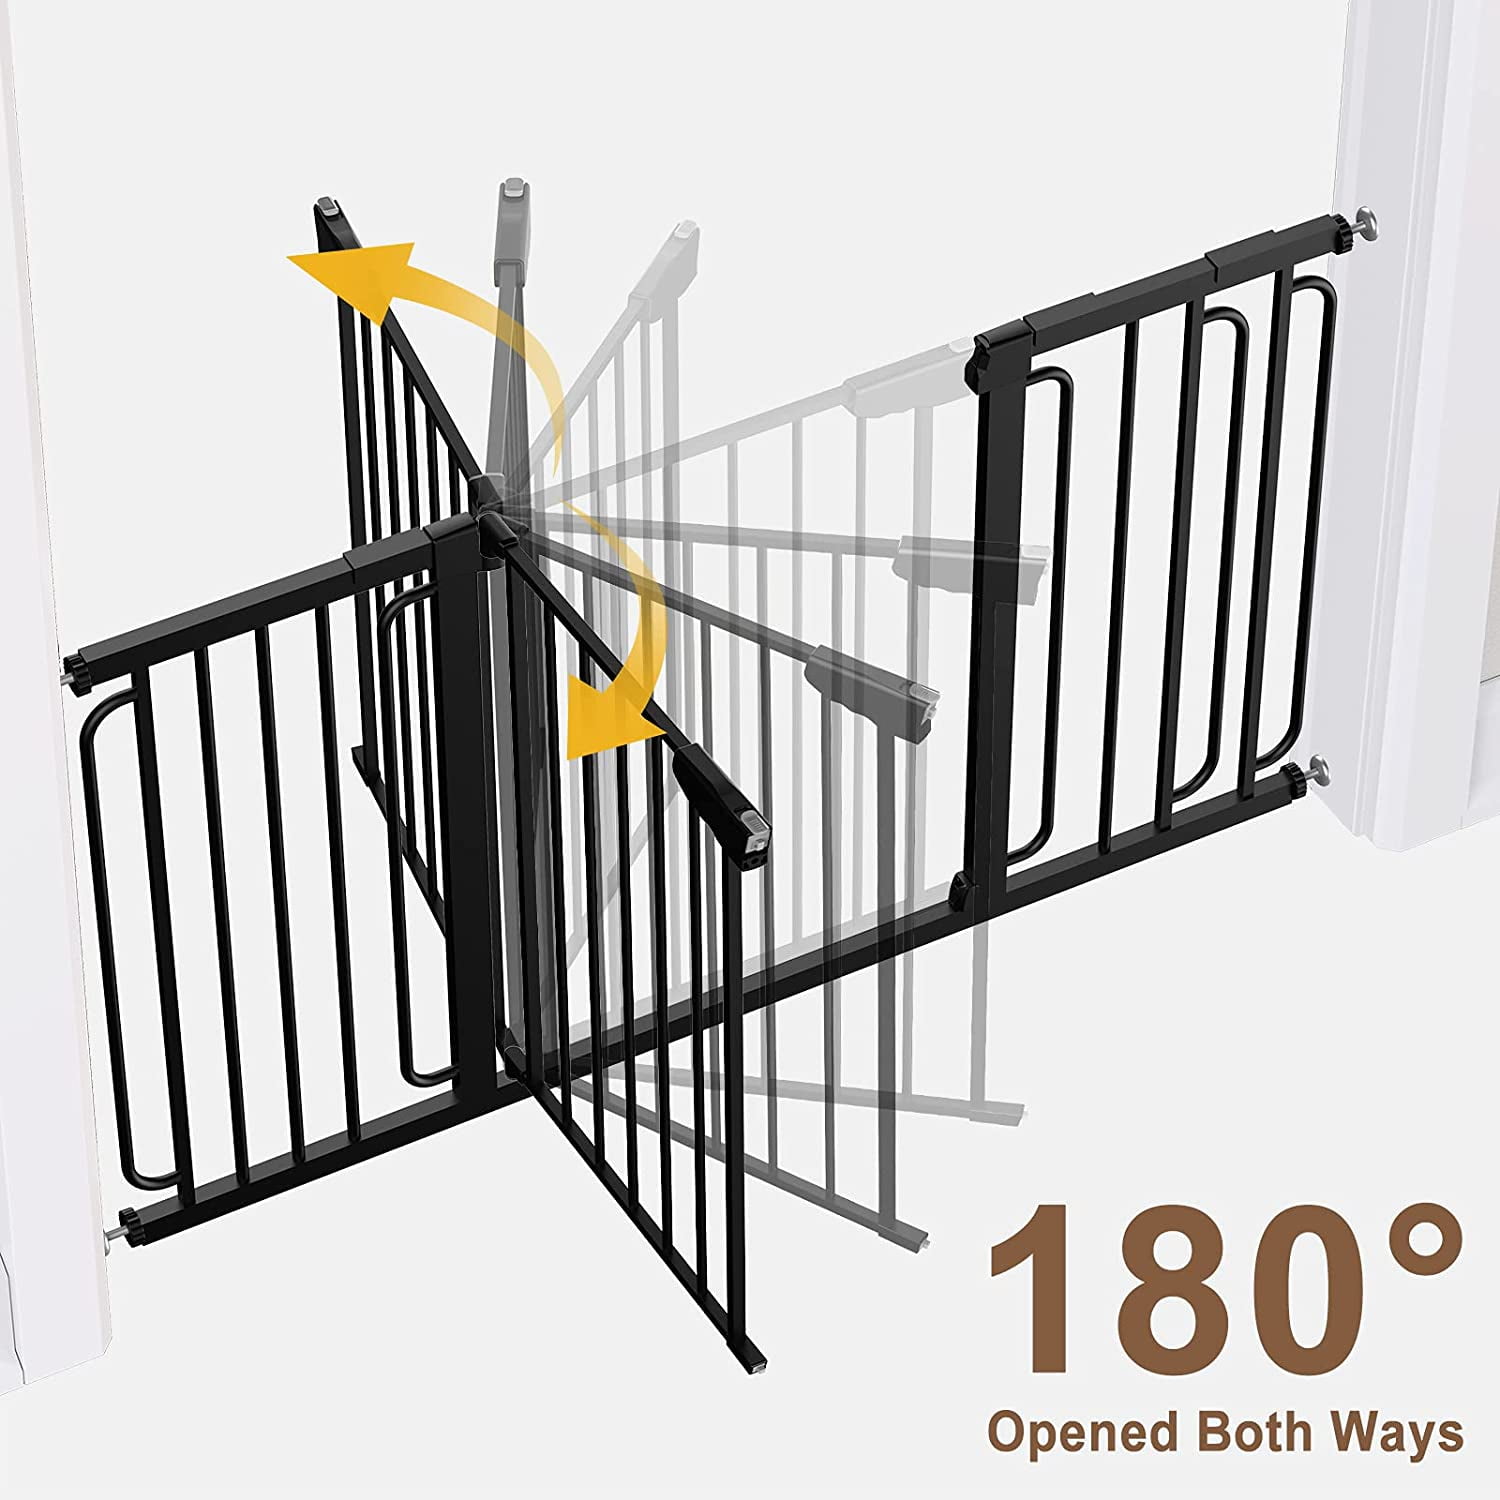 Cumbor Baby Gate for Stairs Extra Wide 57-Inch Dog Gate for Doorways Adjustable Tall Pet Puppy Fence Gate Black Pressure Mounted Walk Through Safety Child Gate for Kids Toddler 